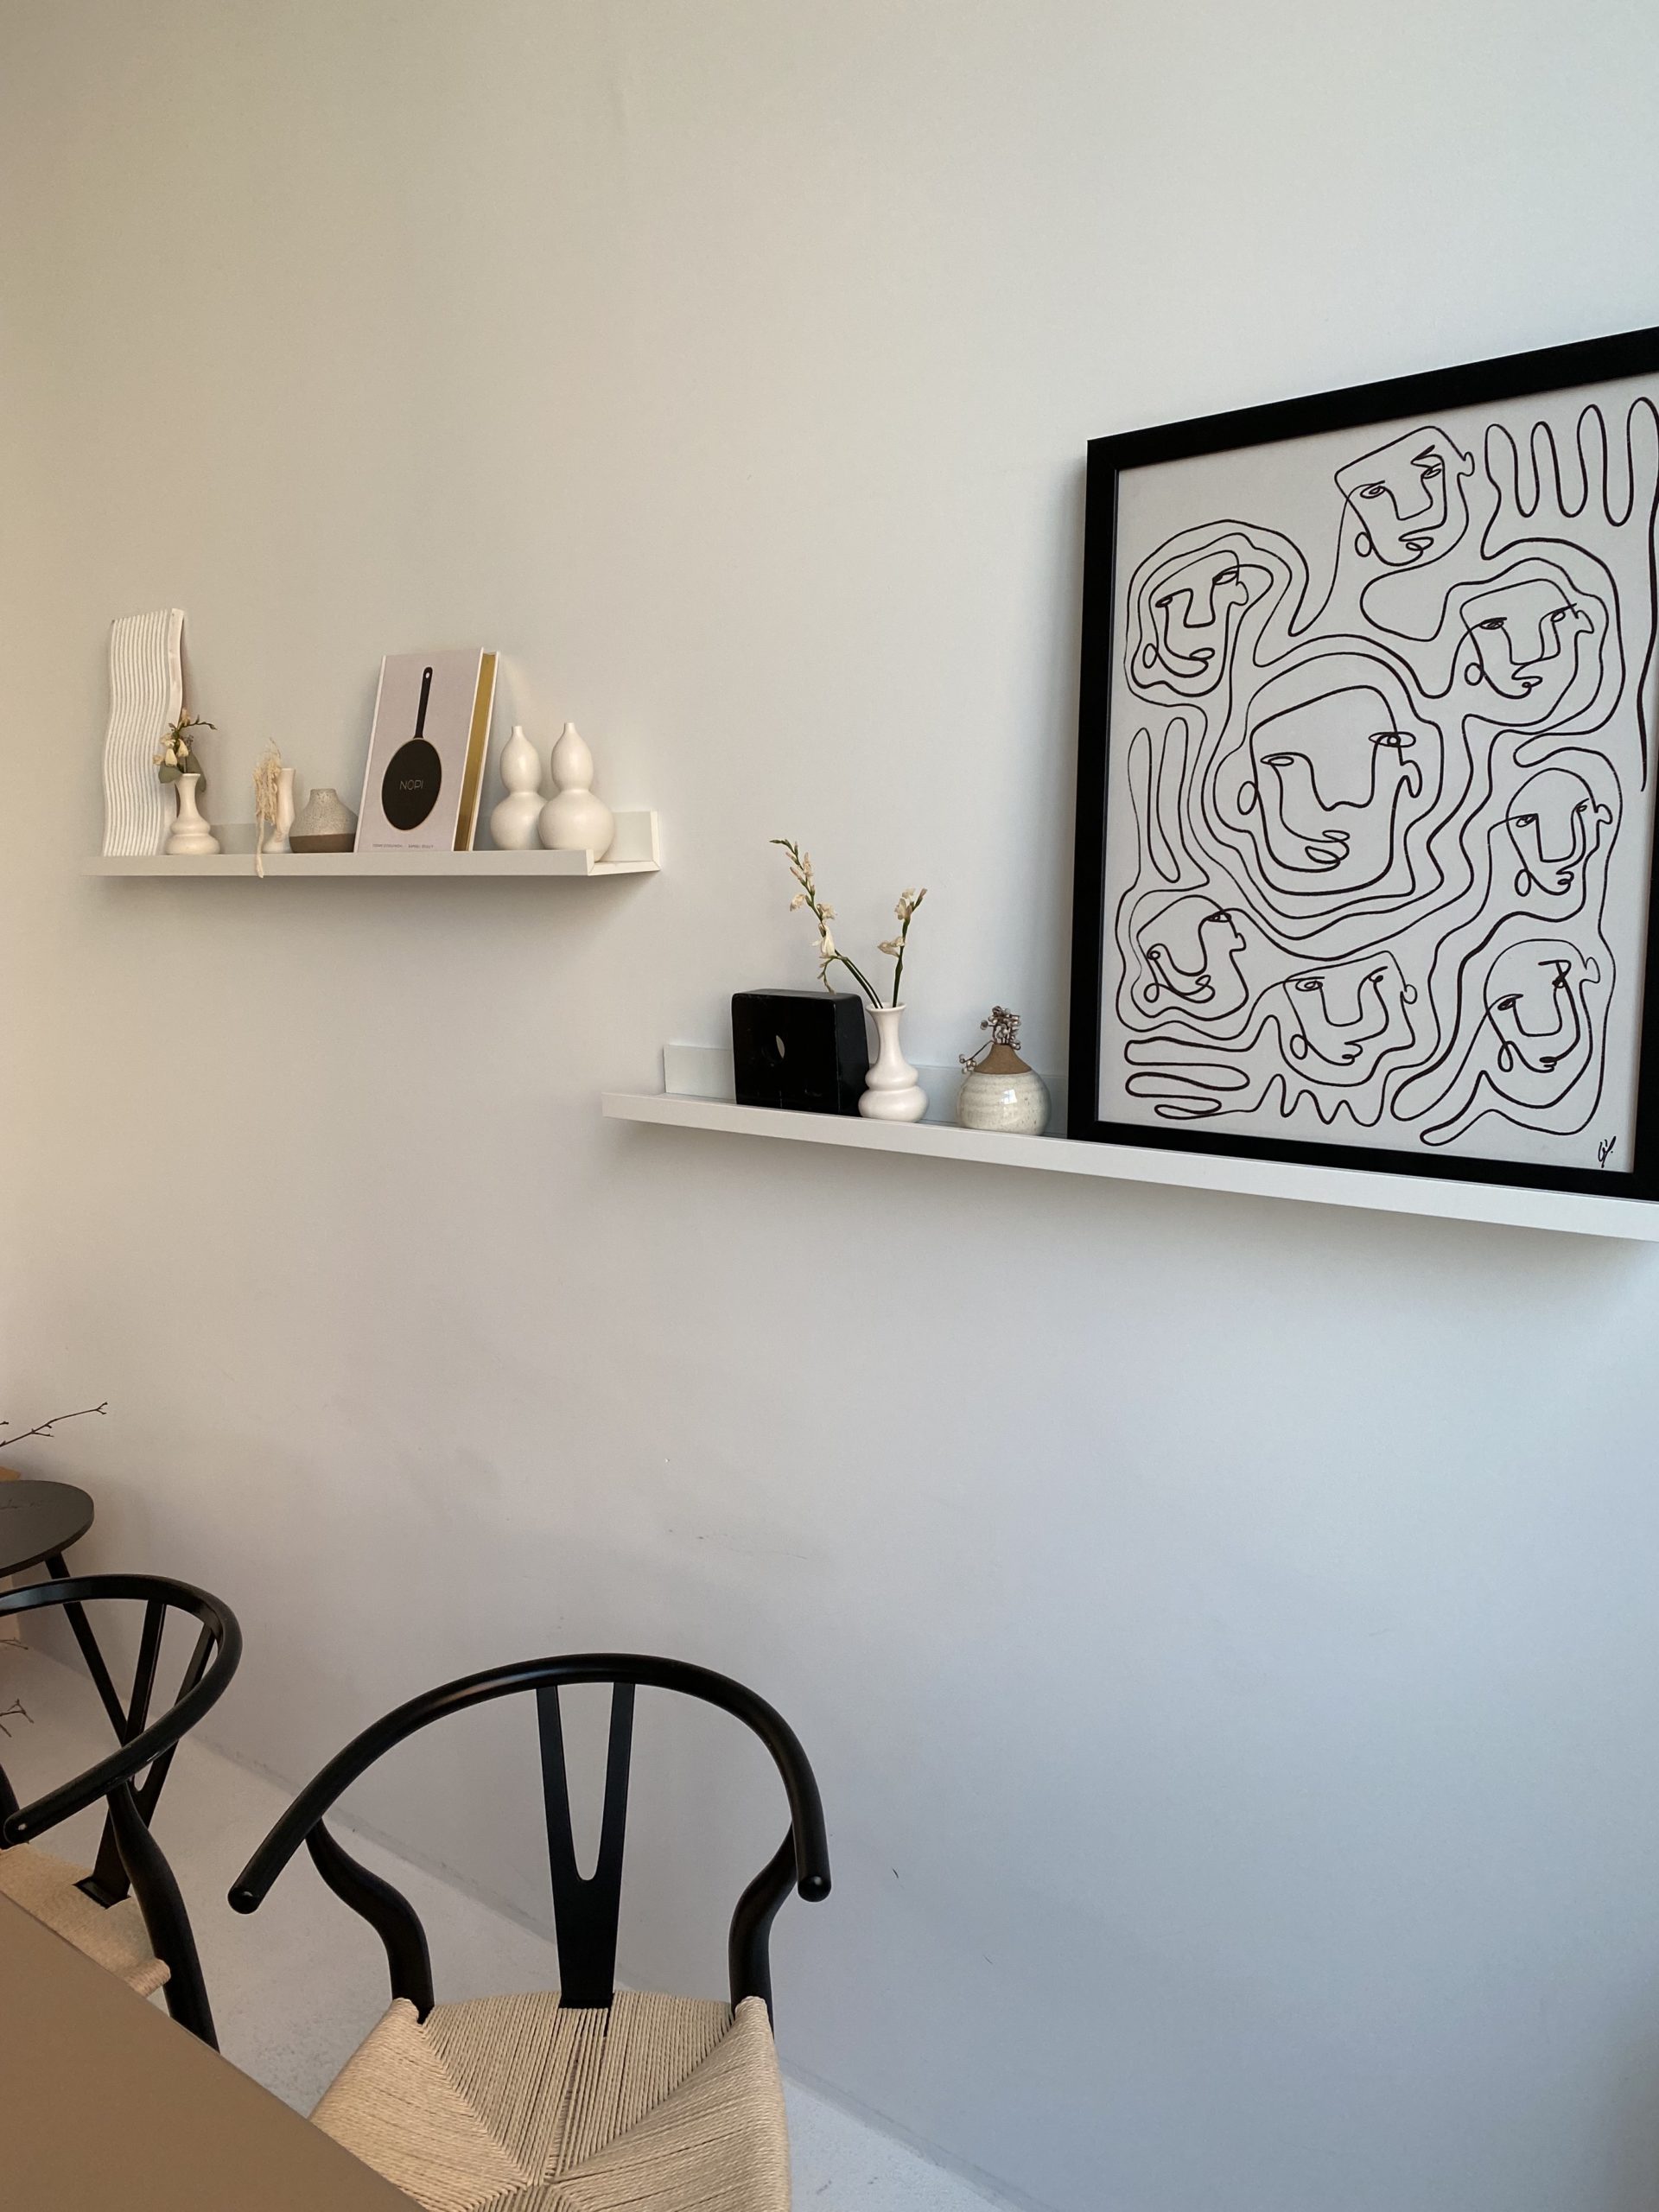 Set against a blank white wall. Tjere is a black and white photo on a shelf next to white trinkets (a mini vase, a small book). There are two wicker chairs with black frames.